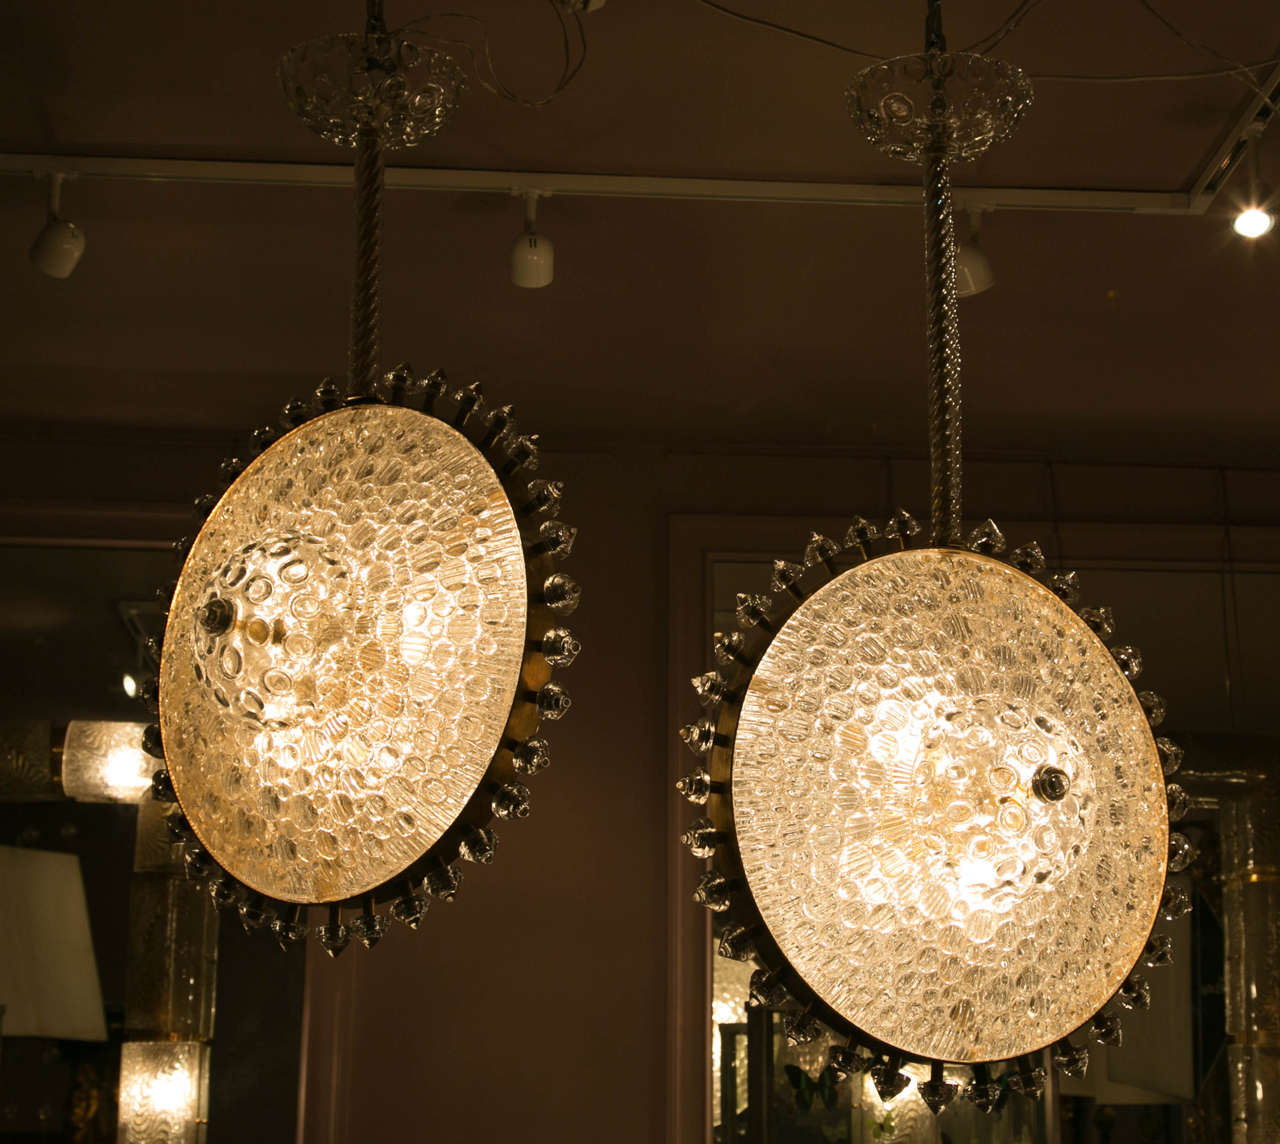 Original pair of Murano glass chandeliers, sun shape, one chandelier is 100 cm high, the other one 110 cm.